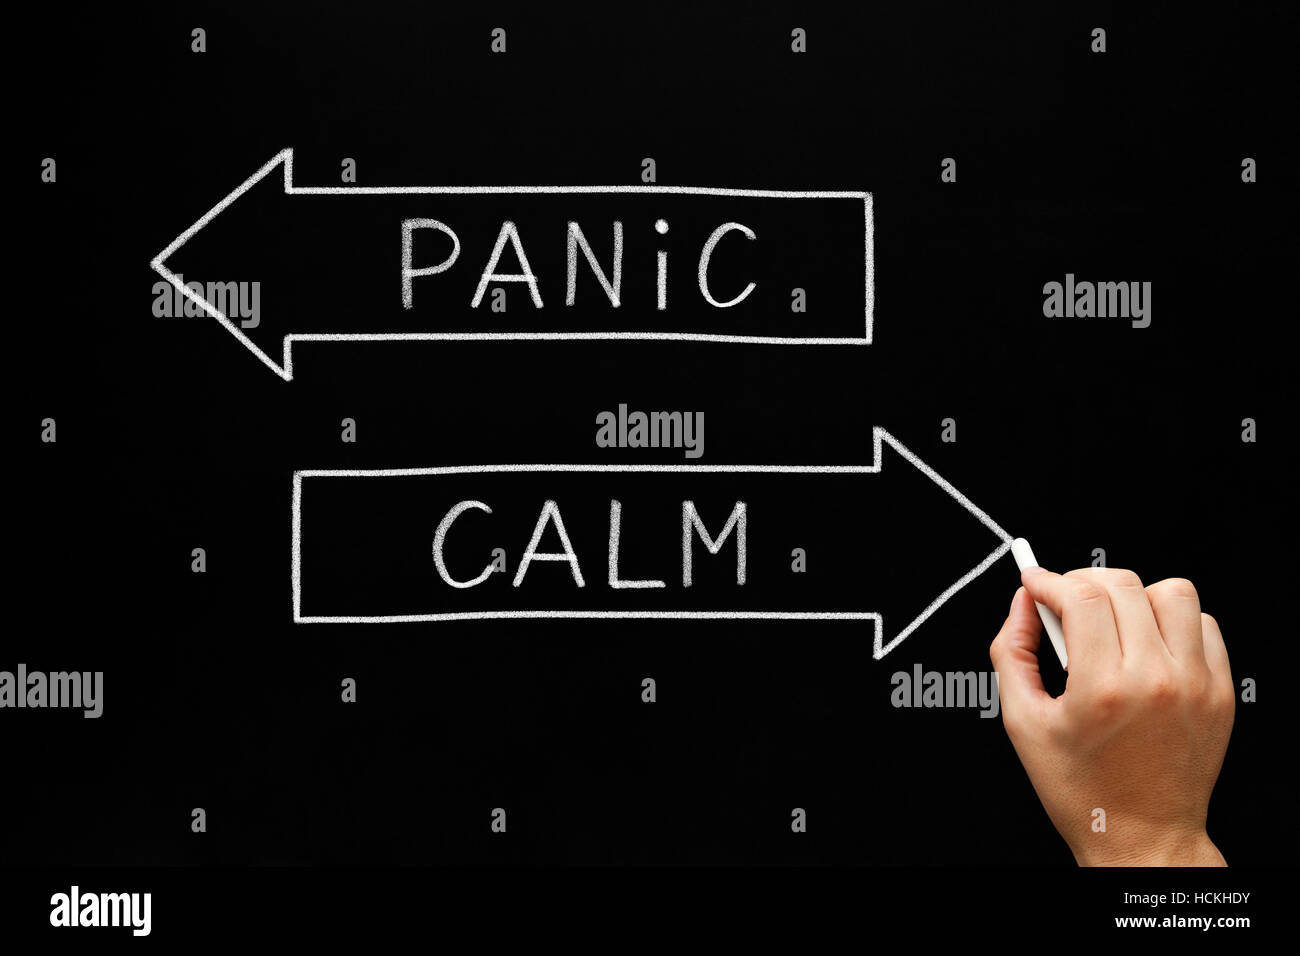 Hand drawing Panic or Calm concept with white chalk on blackboard. Stock Photo